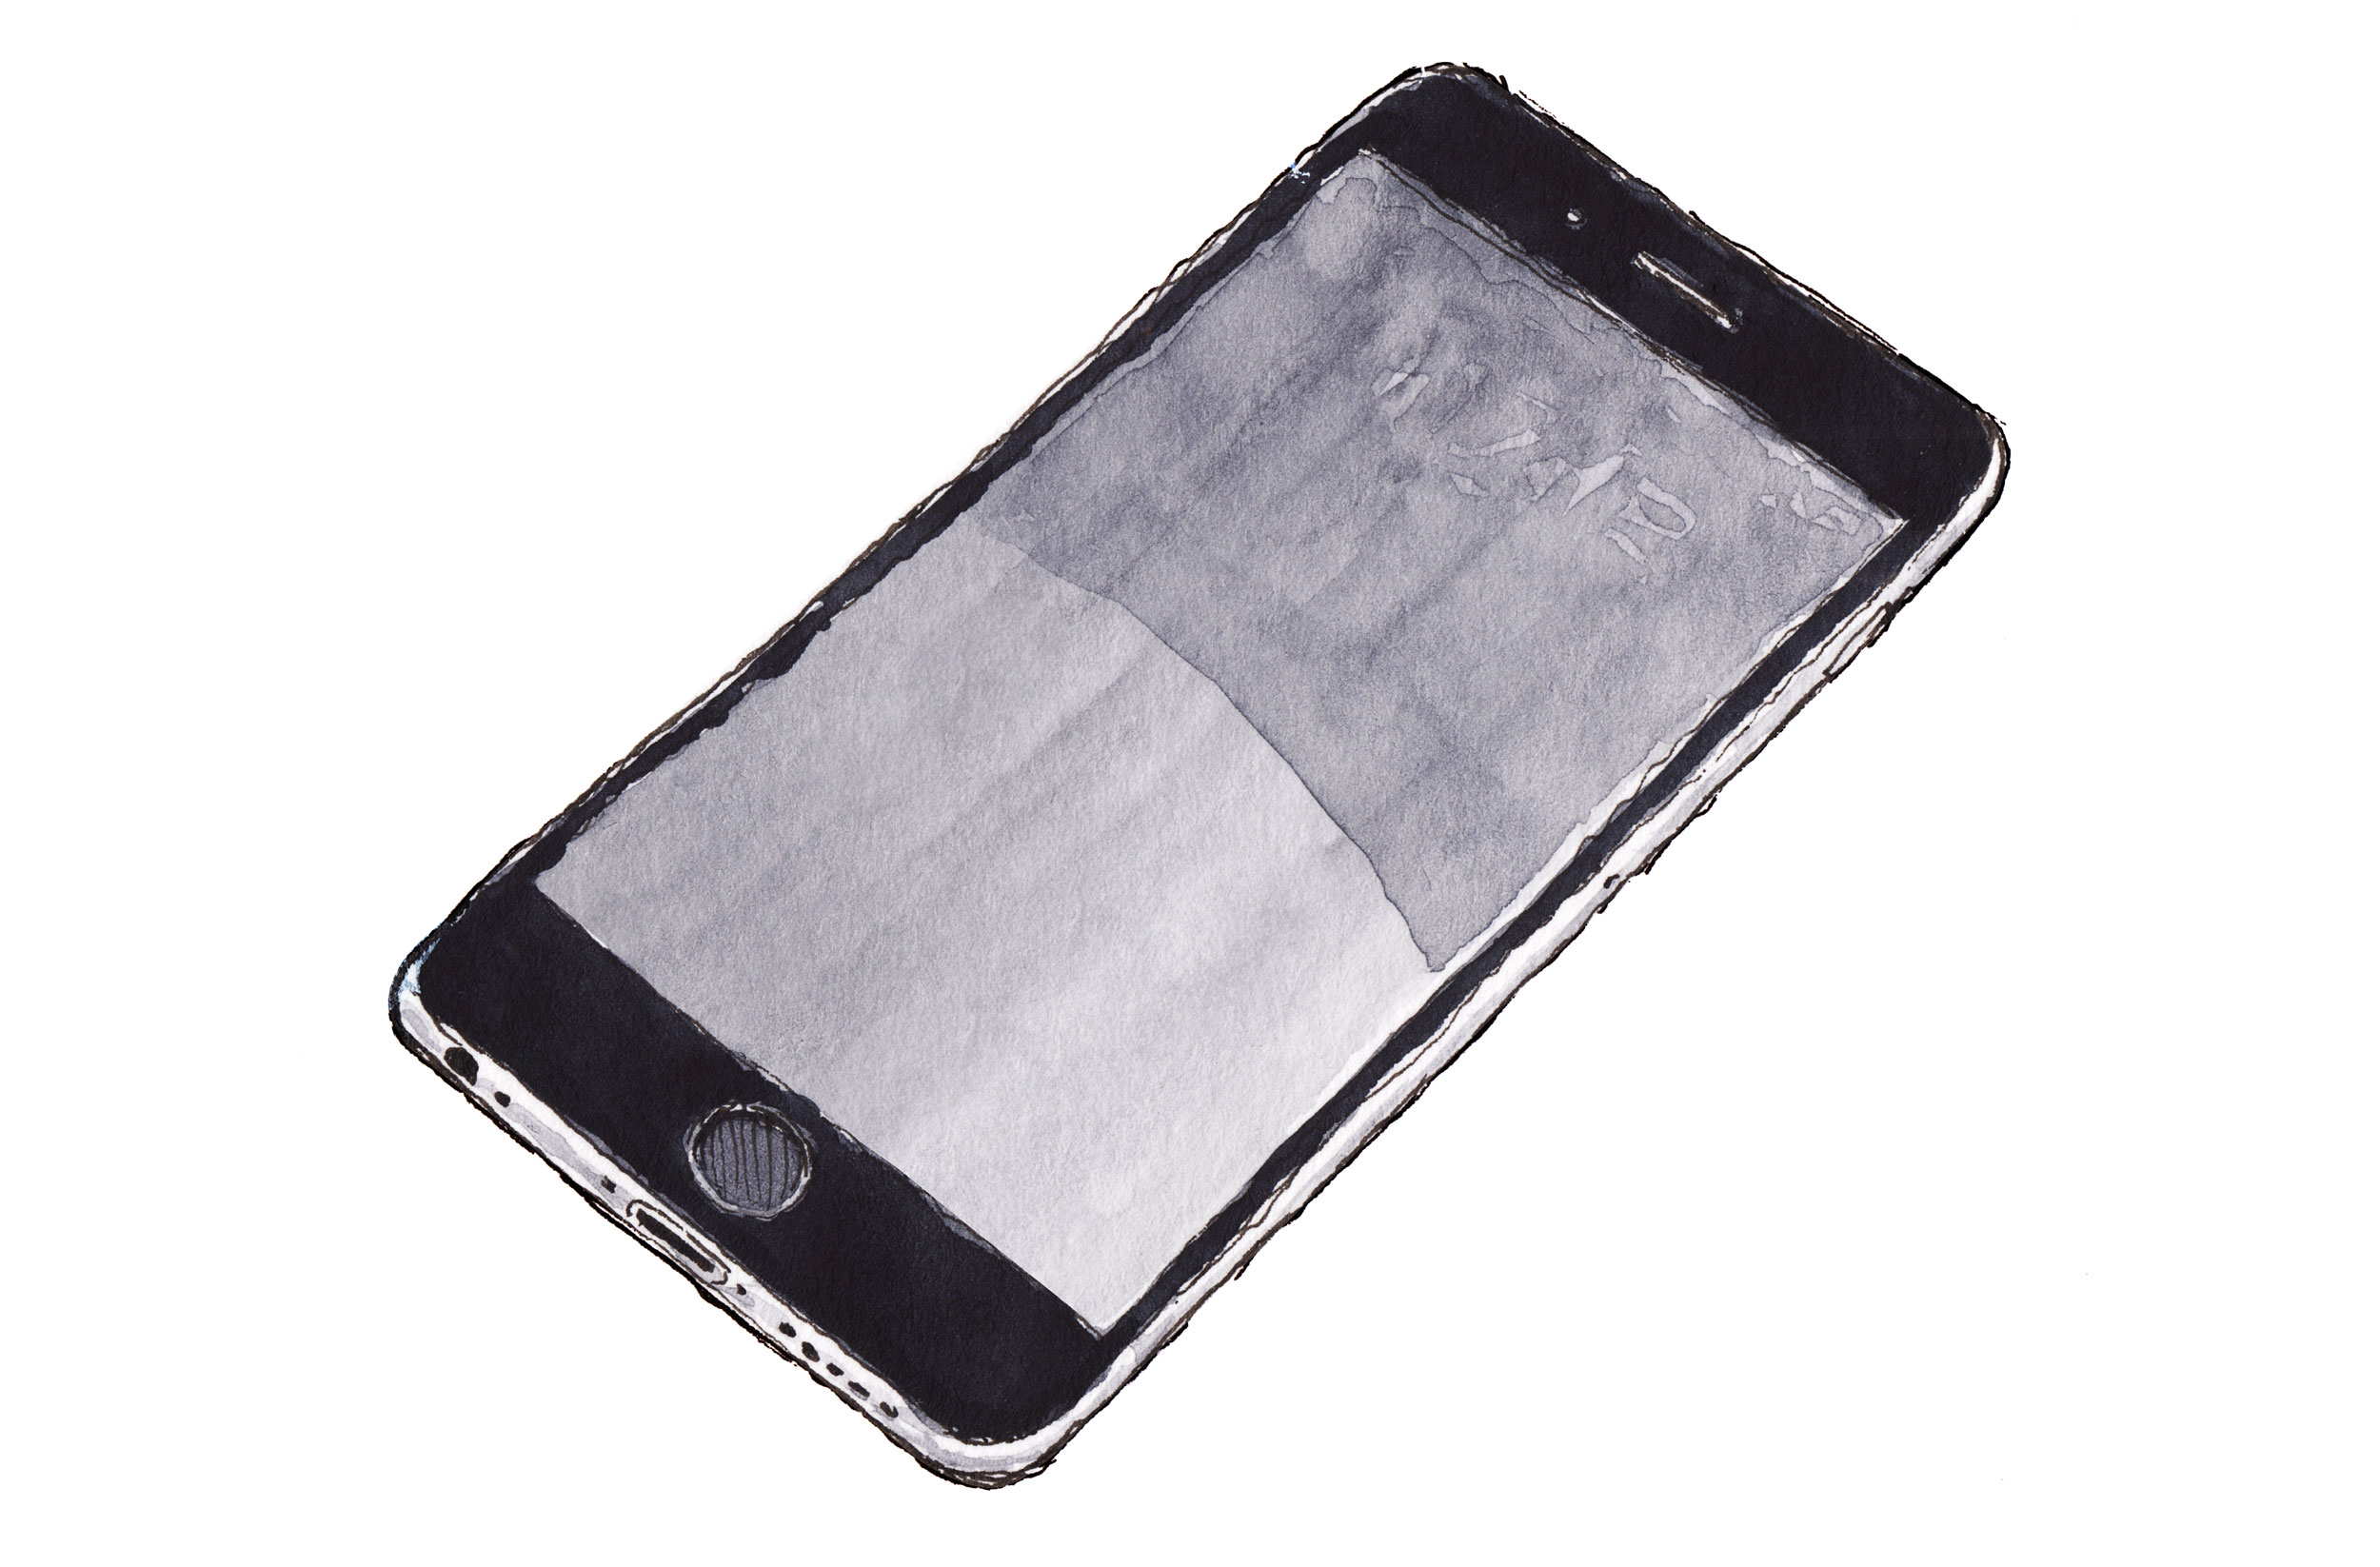 Sketch of an iPhone 6.